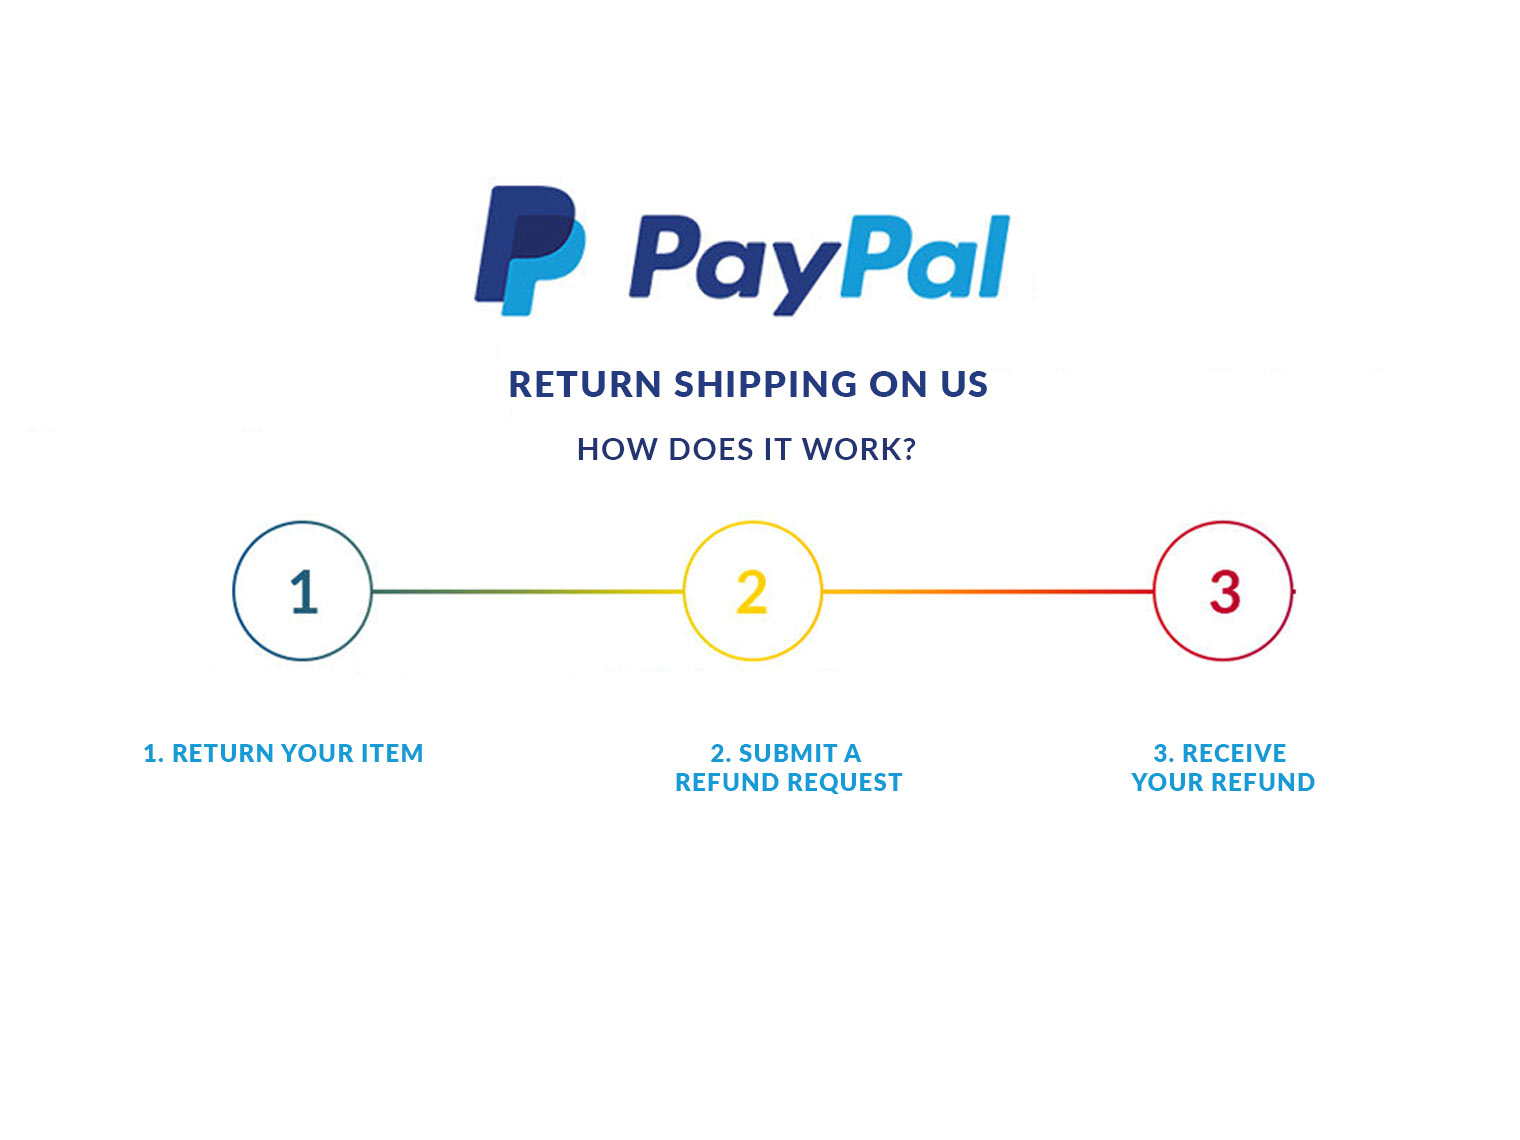 Paypal - Refunds on your return shipping costs